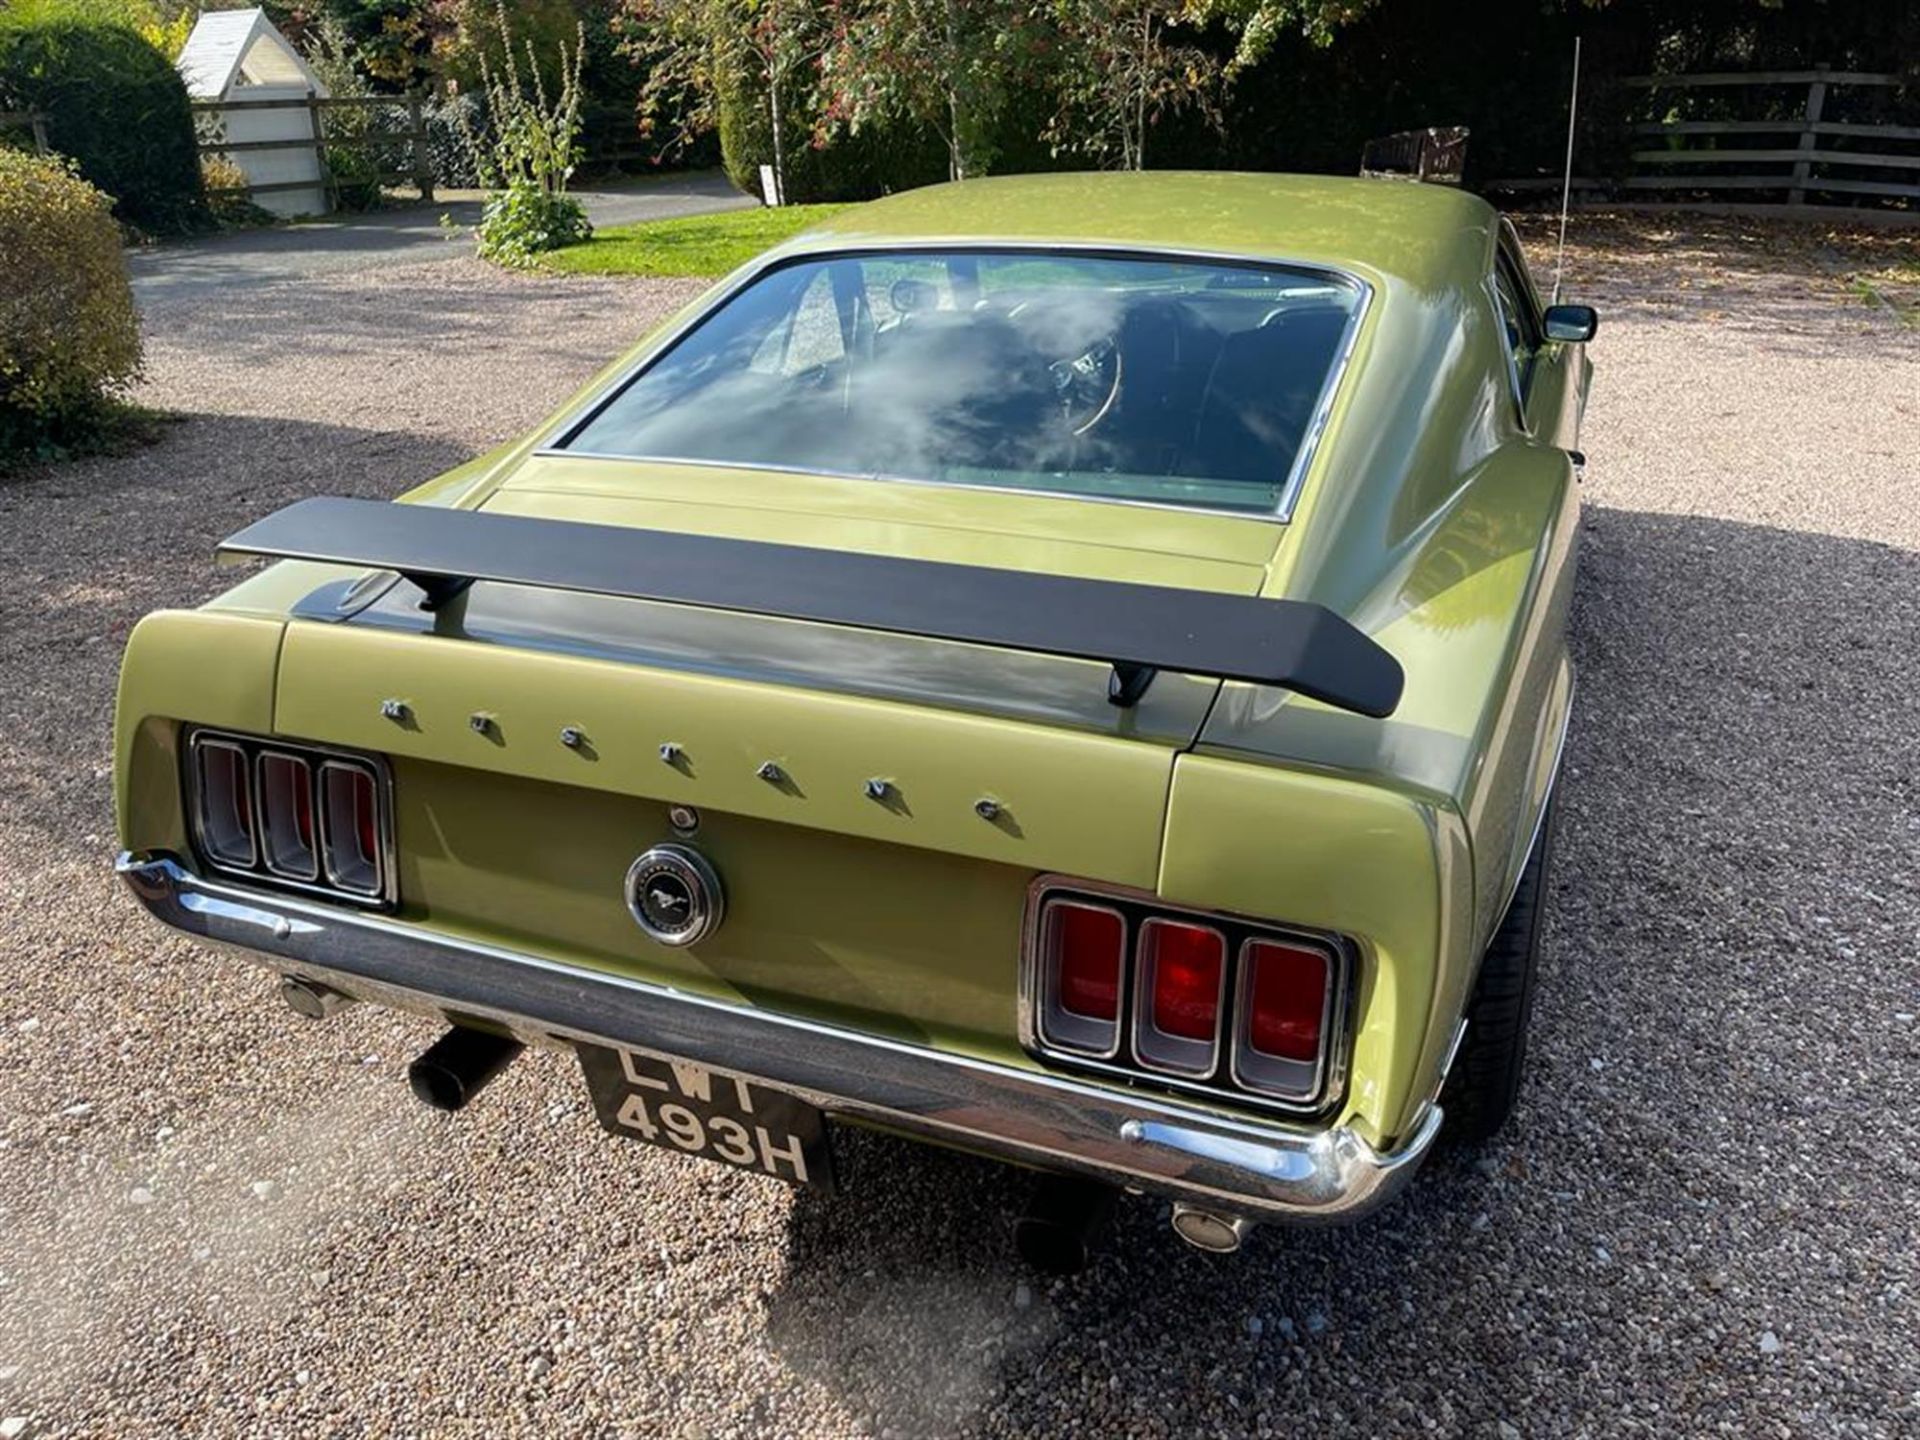 1970 Ford Mustang Fastback - Image 6 of 10